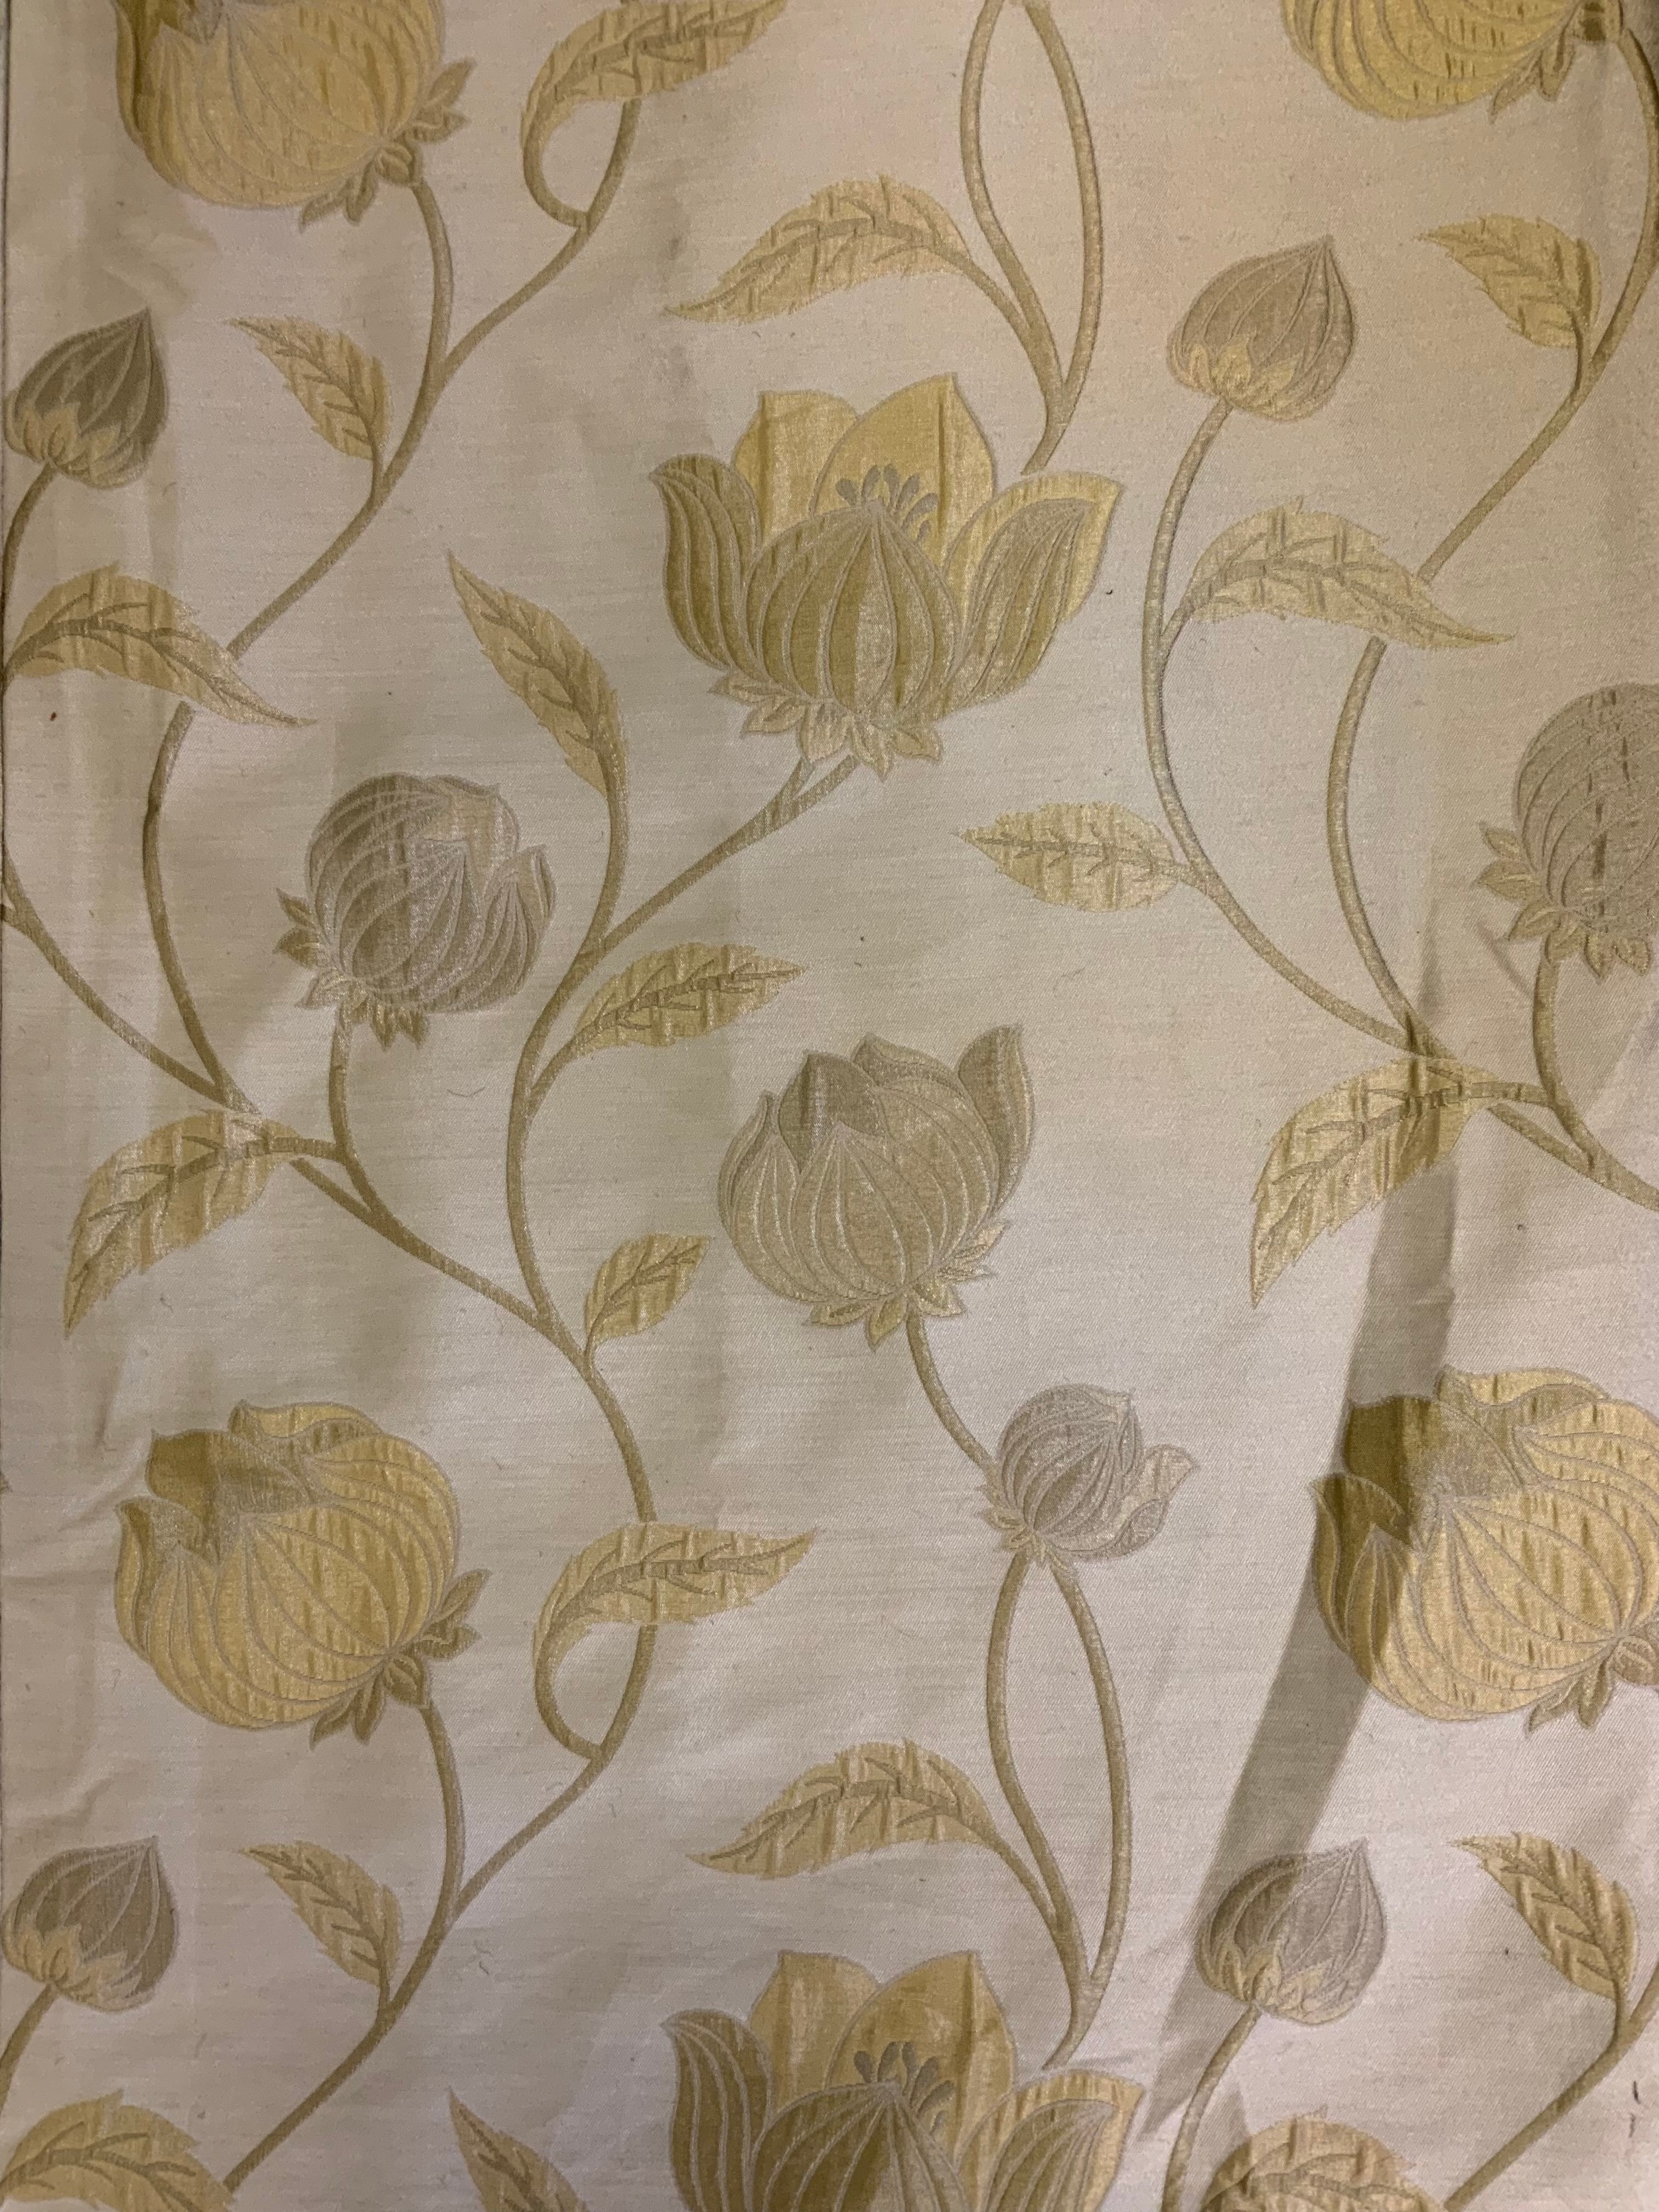 Large pair of cream and gold Damask curtains 335cm wide x 85cm length - Bild 2 aus 2